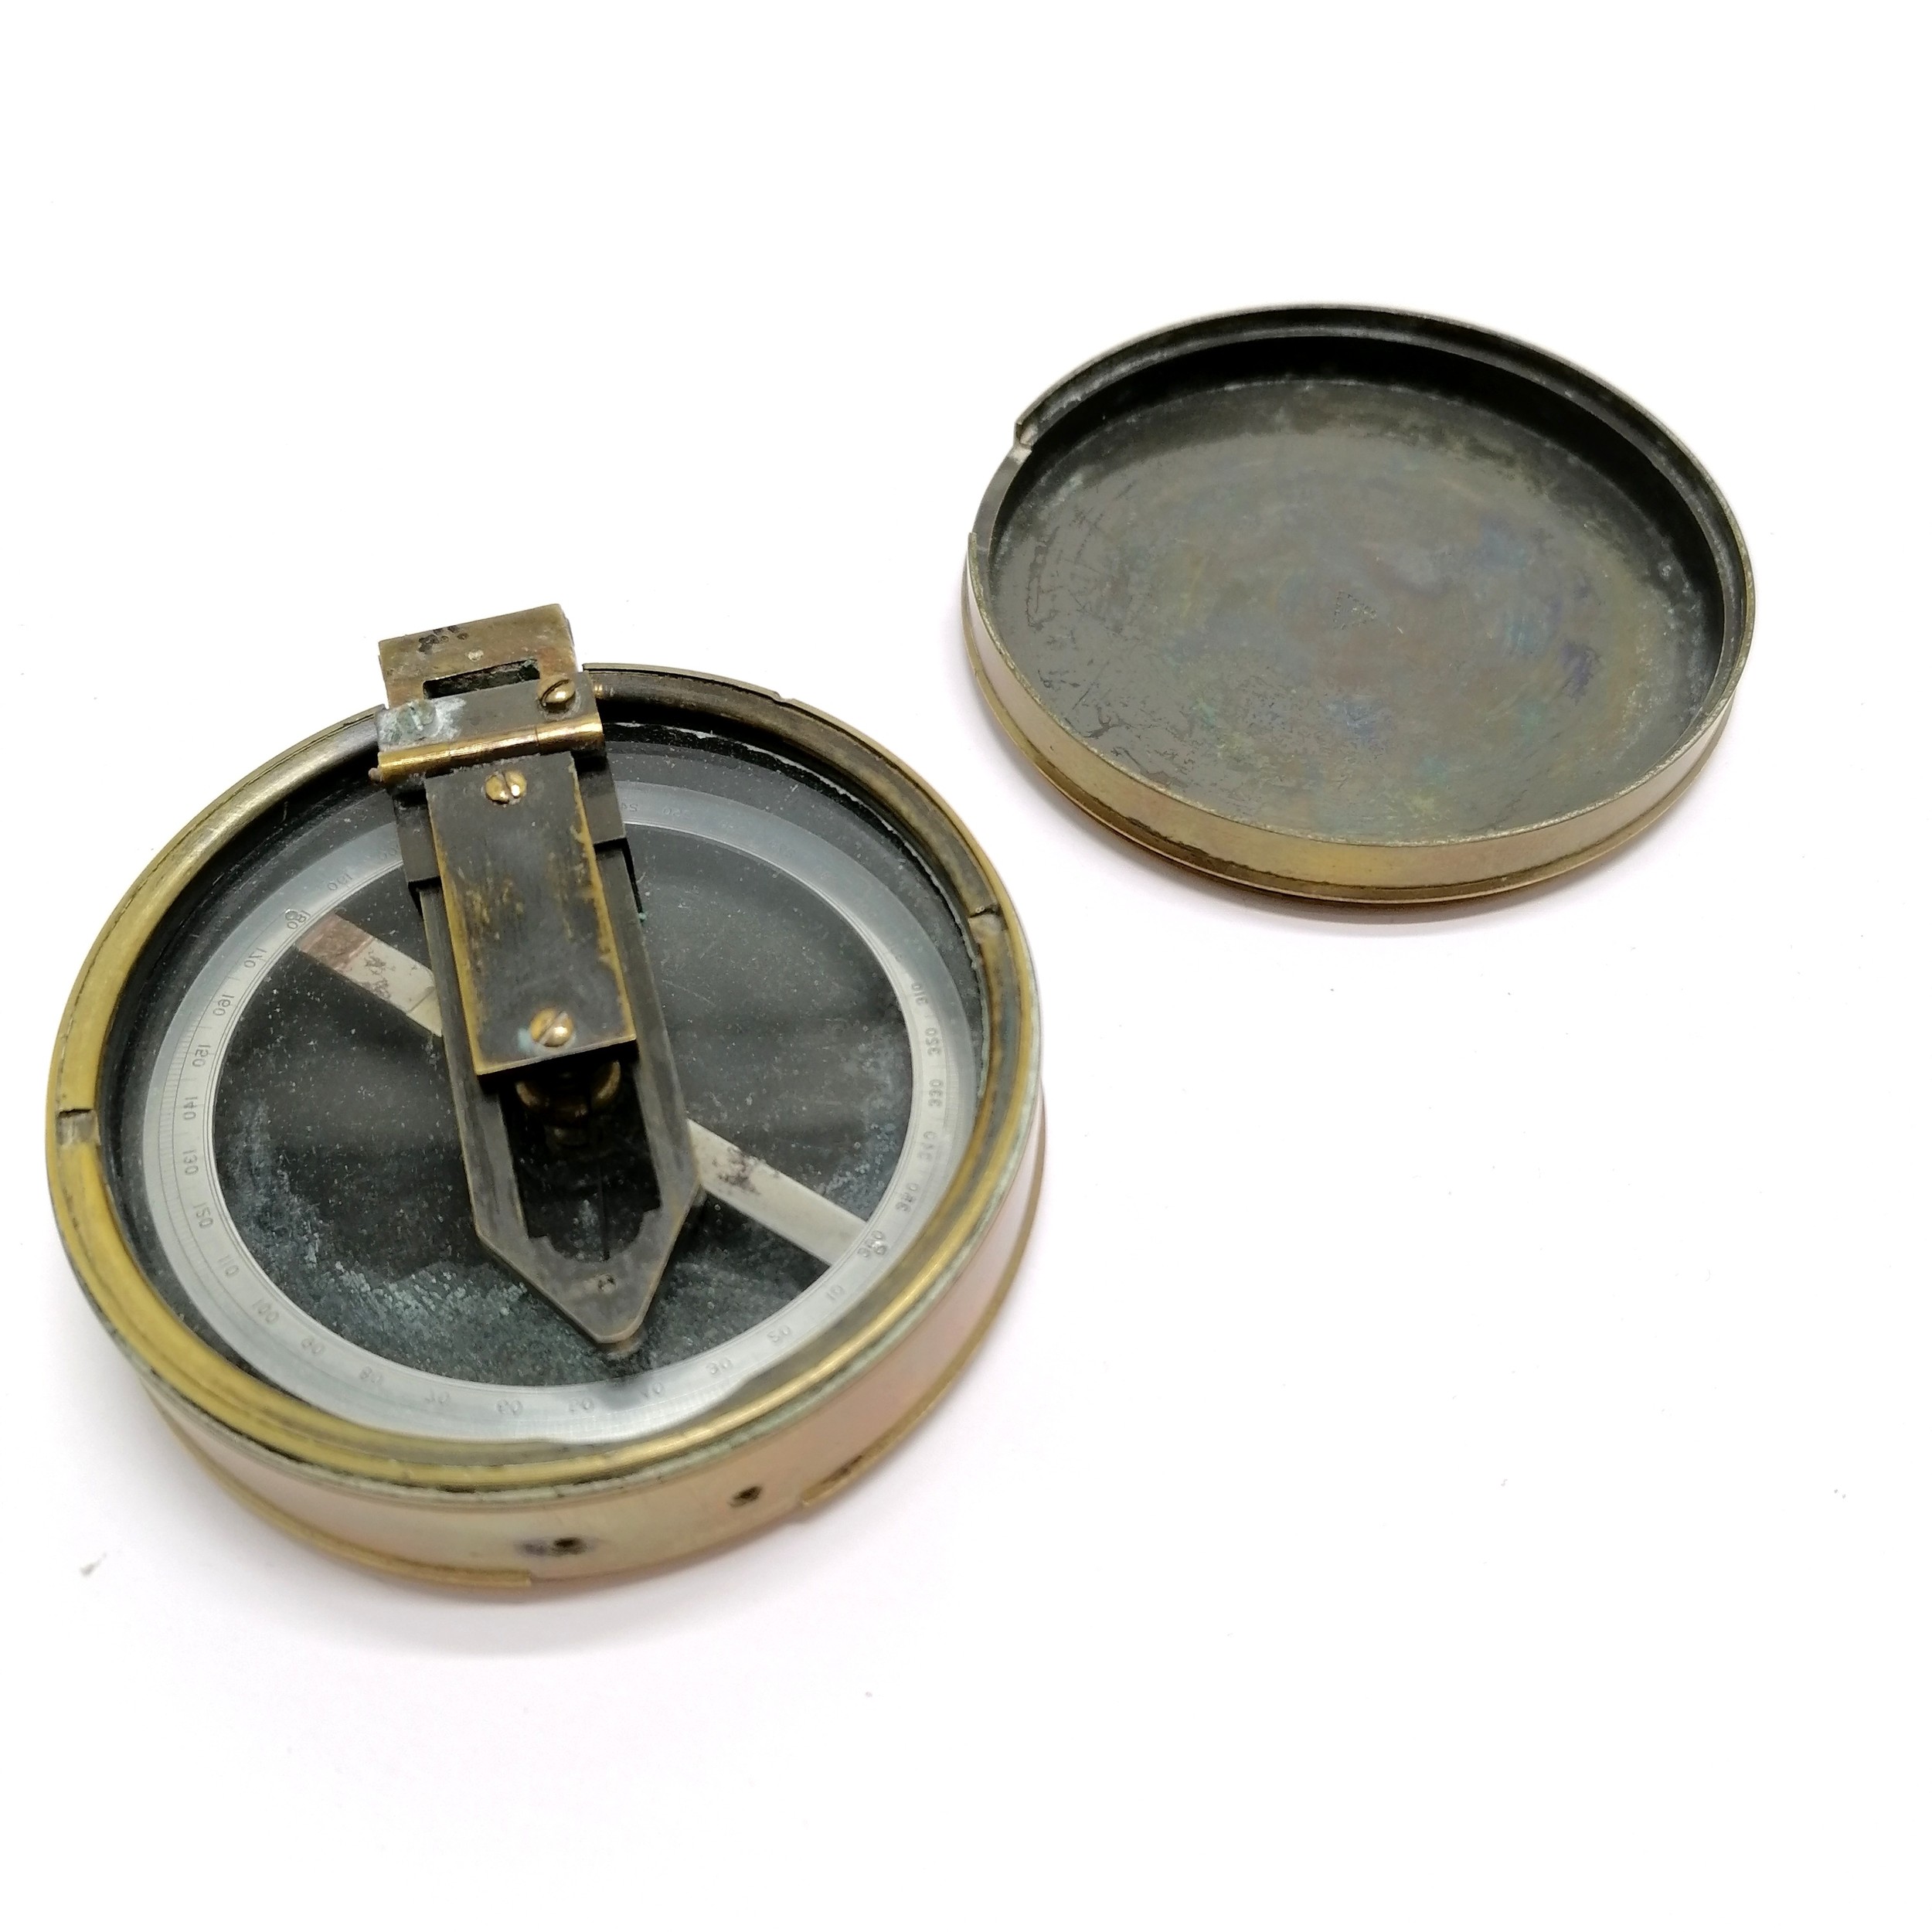 Antique prismatic compass (7.4cm diameter & missing lens) retailed by Hirsbrunner & Co (Tientsin) in - Image 3 of 5